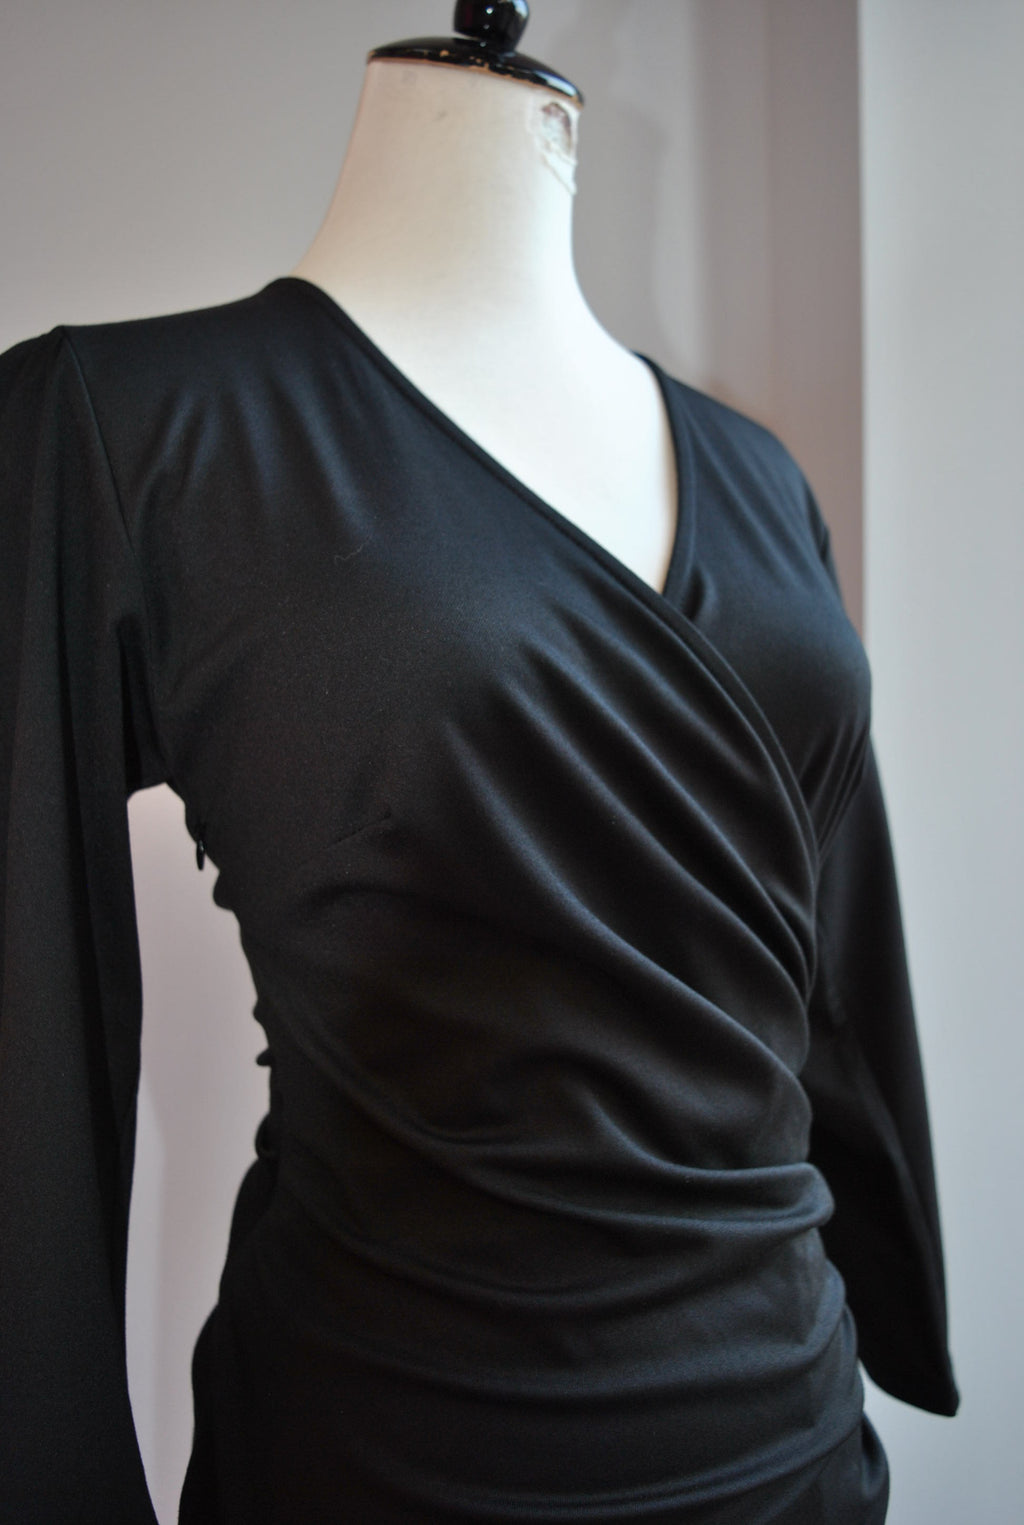 BLACK SIMPLE DRESS WITH RUSHING